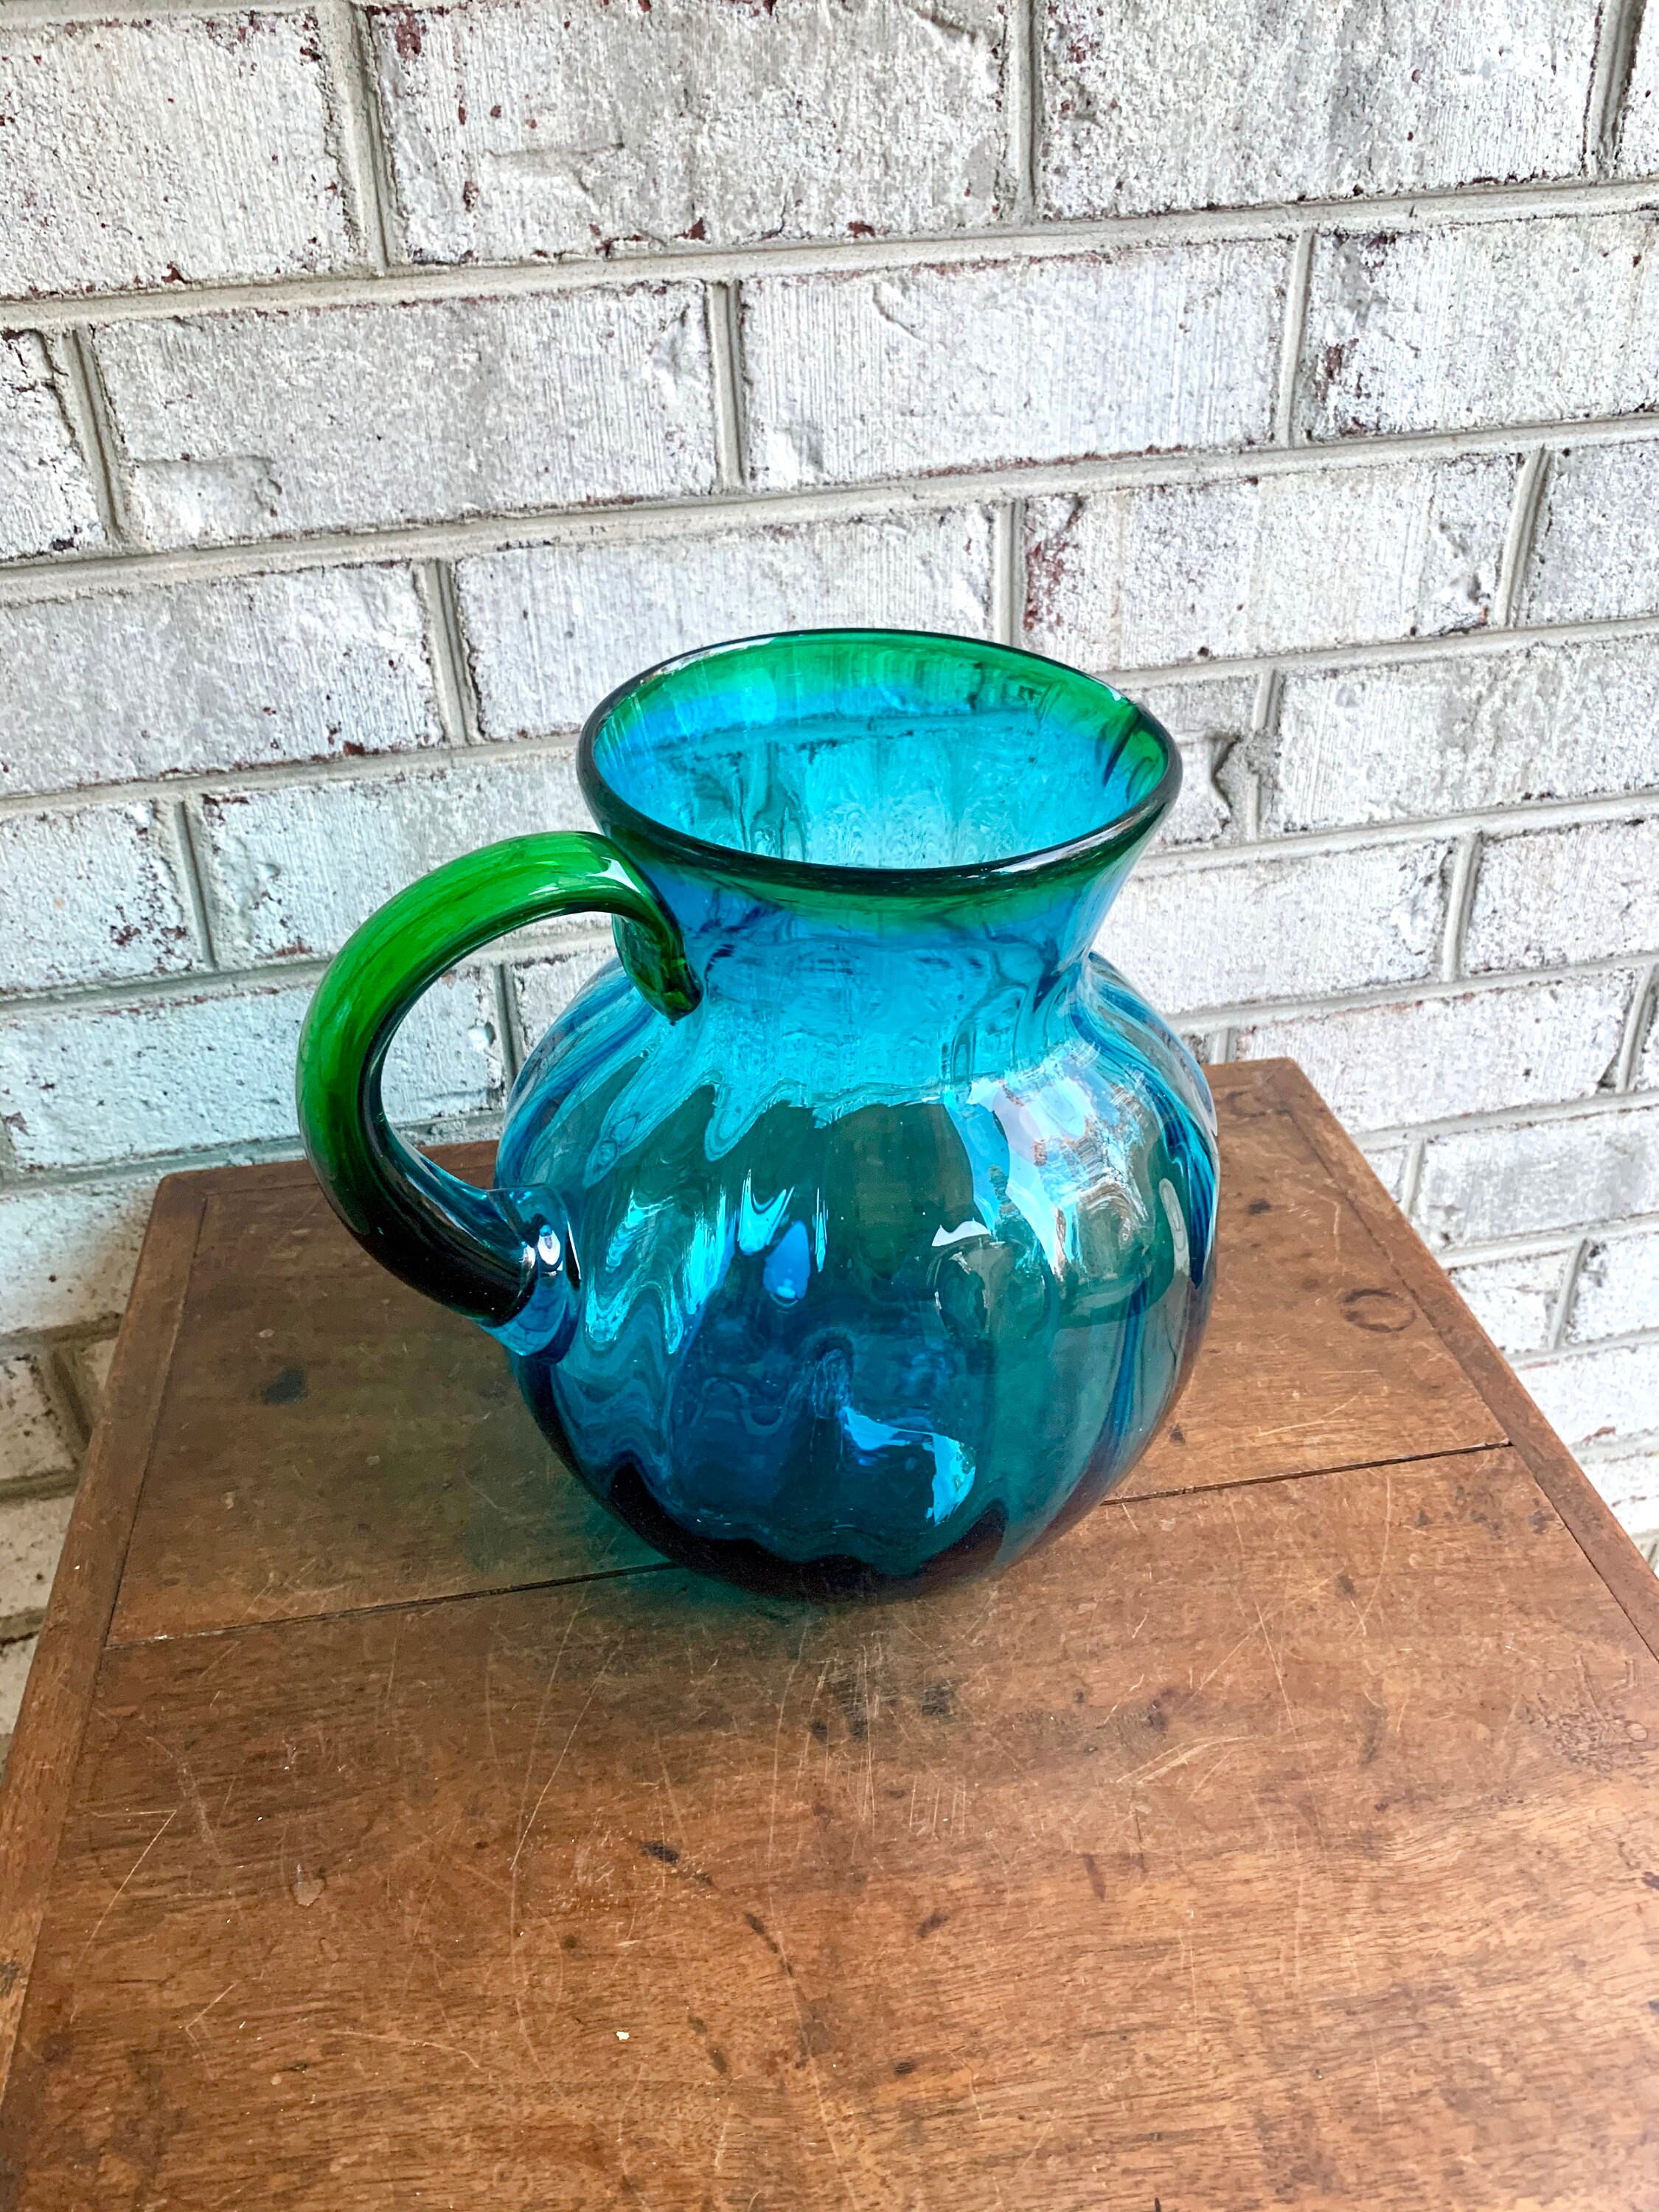 Manzano Garcia Sangria Pitcher, Blue with Colors